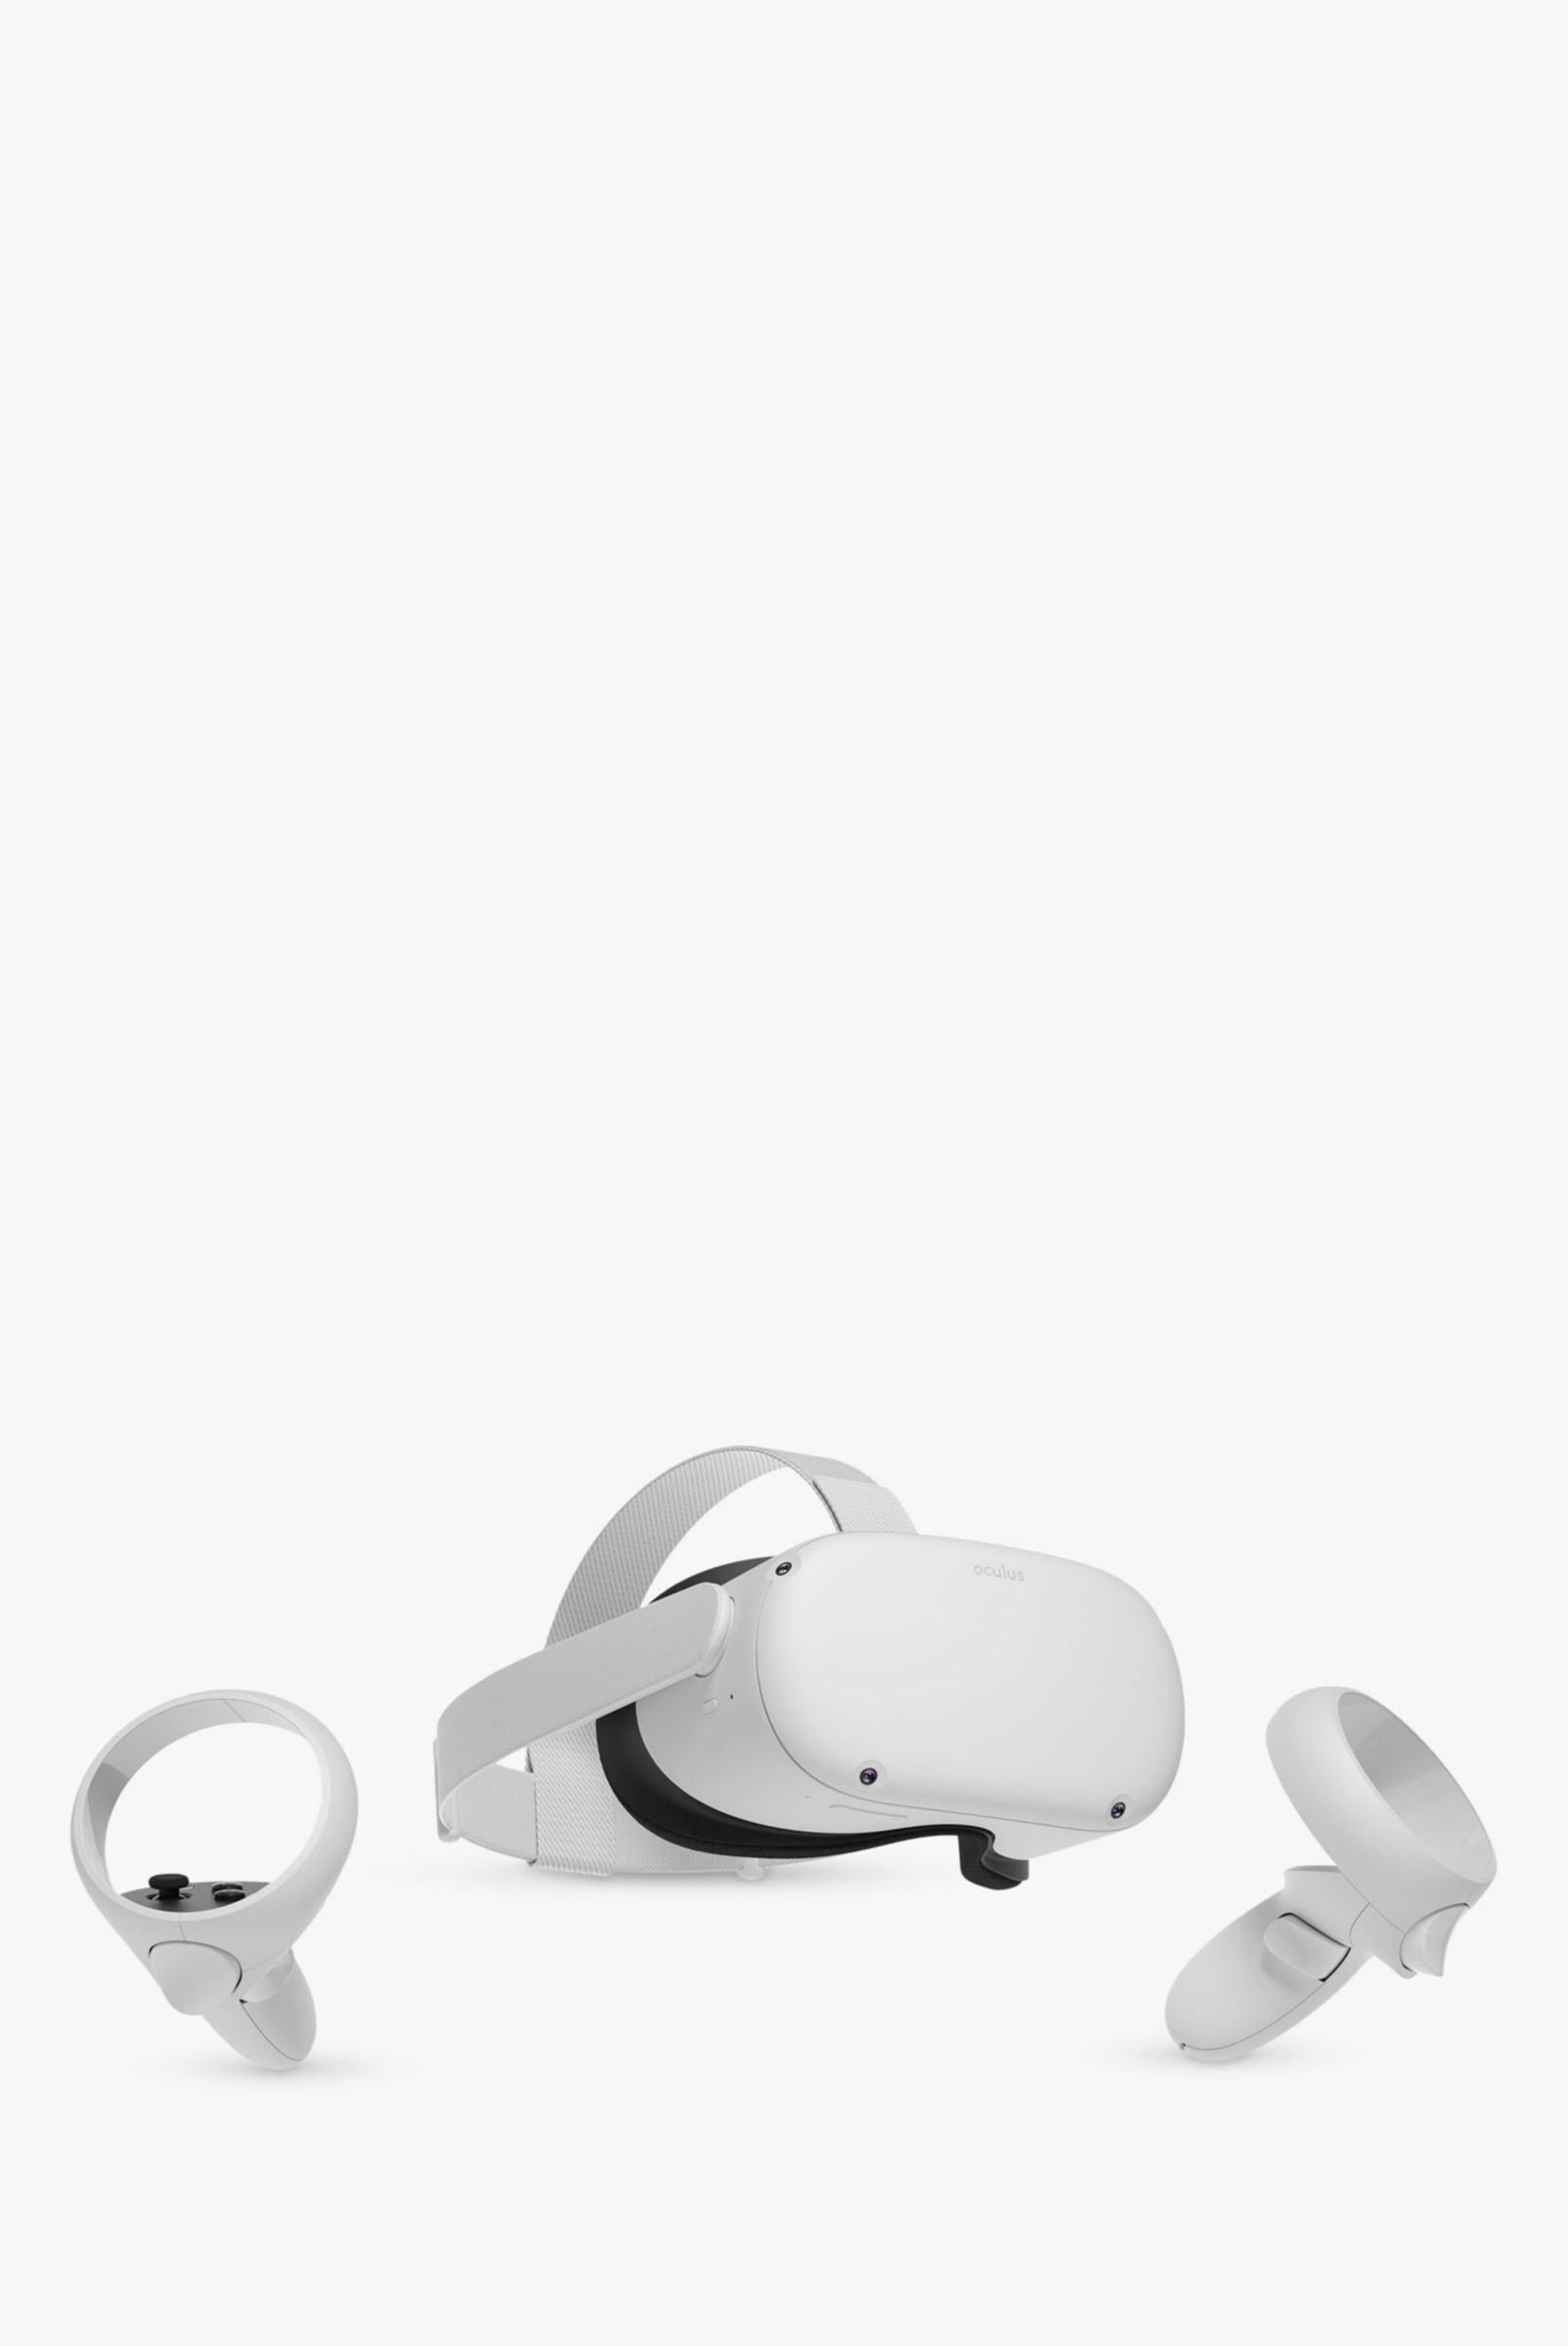 Oculus Quest 2, All-In-One Virtual Reality Headset and Controllers, 128GB Oculus Quest 2, All-In-One Virtual Reality Headset and Controllers, 128GB Oculus Quest 2, All-In-One Virtual Reality Headset and Controllers, 128GB Oculus Quest 2, All-In-One Virtual Reality Headset and Controllers, 128GB Oculus Quest 2, All-In-One Virtual Reality Headset and Controllers, 128GB Oculus Quest 2, All-In-One Virtual Reality Headset and Controllers, 128GB Oculus Quest 2, All-In-One Virtual Reality Headset and Controllers, 128GB Oculus Quest 2, All-In-One Virtual Reality Headset and Controllers, 128GB